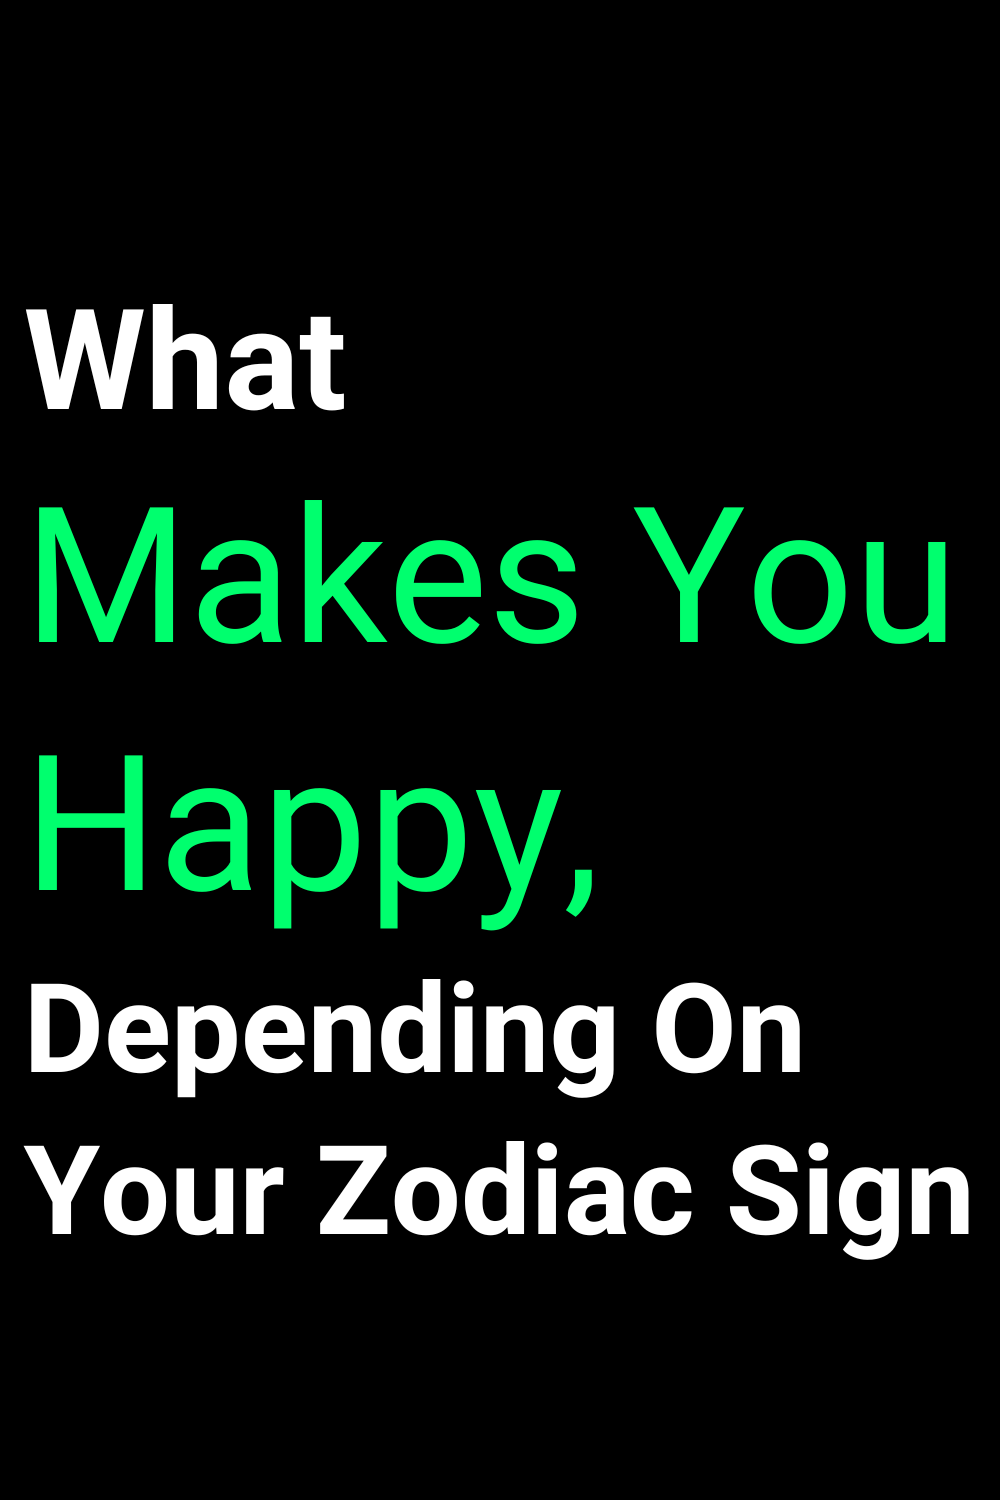 What Makes You Happy, Depending On Your Zodiac Sign